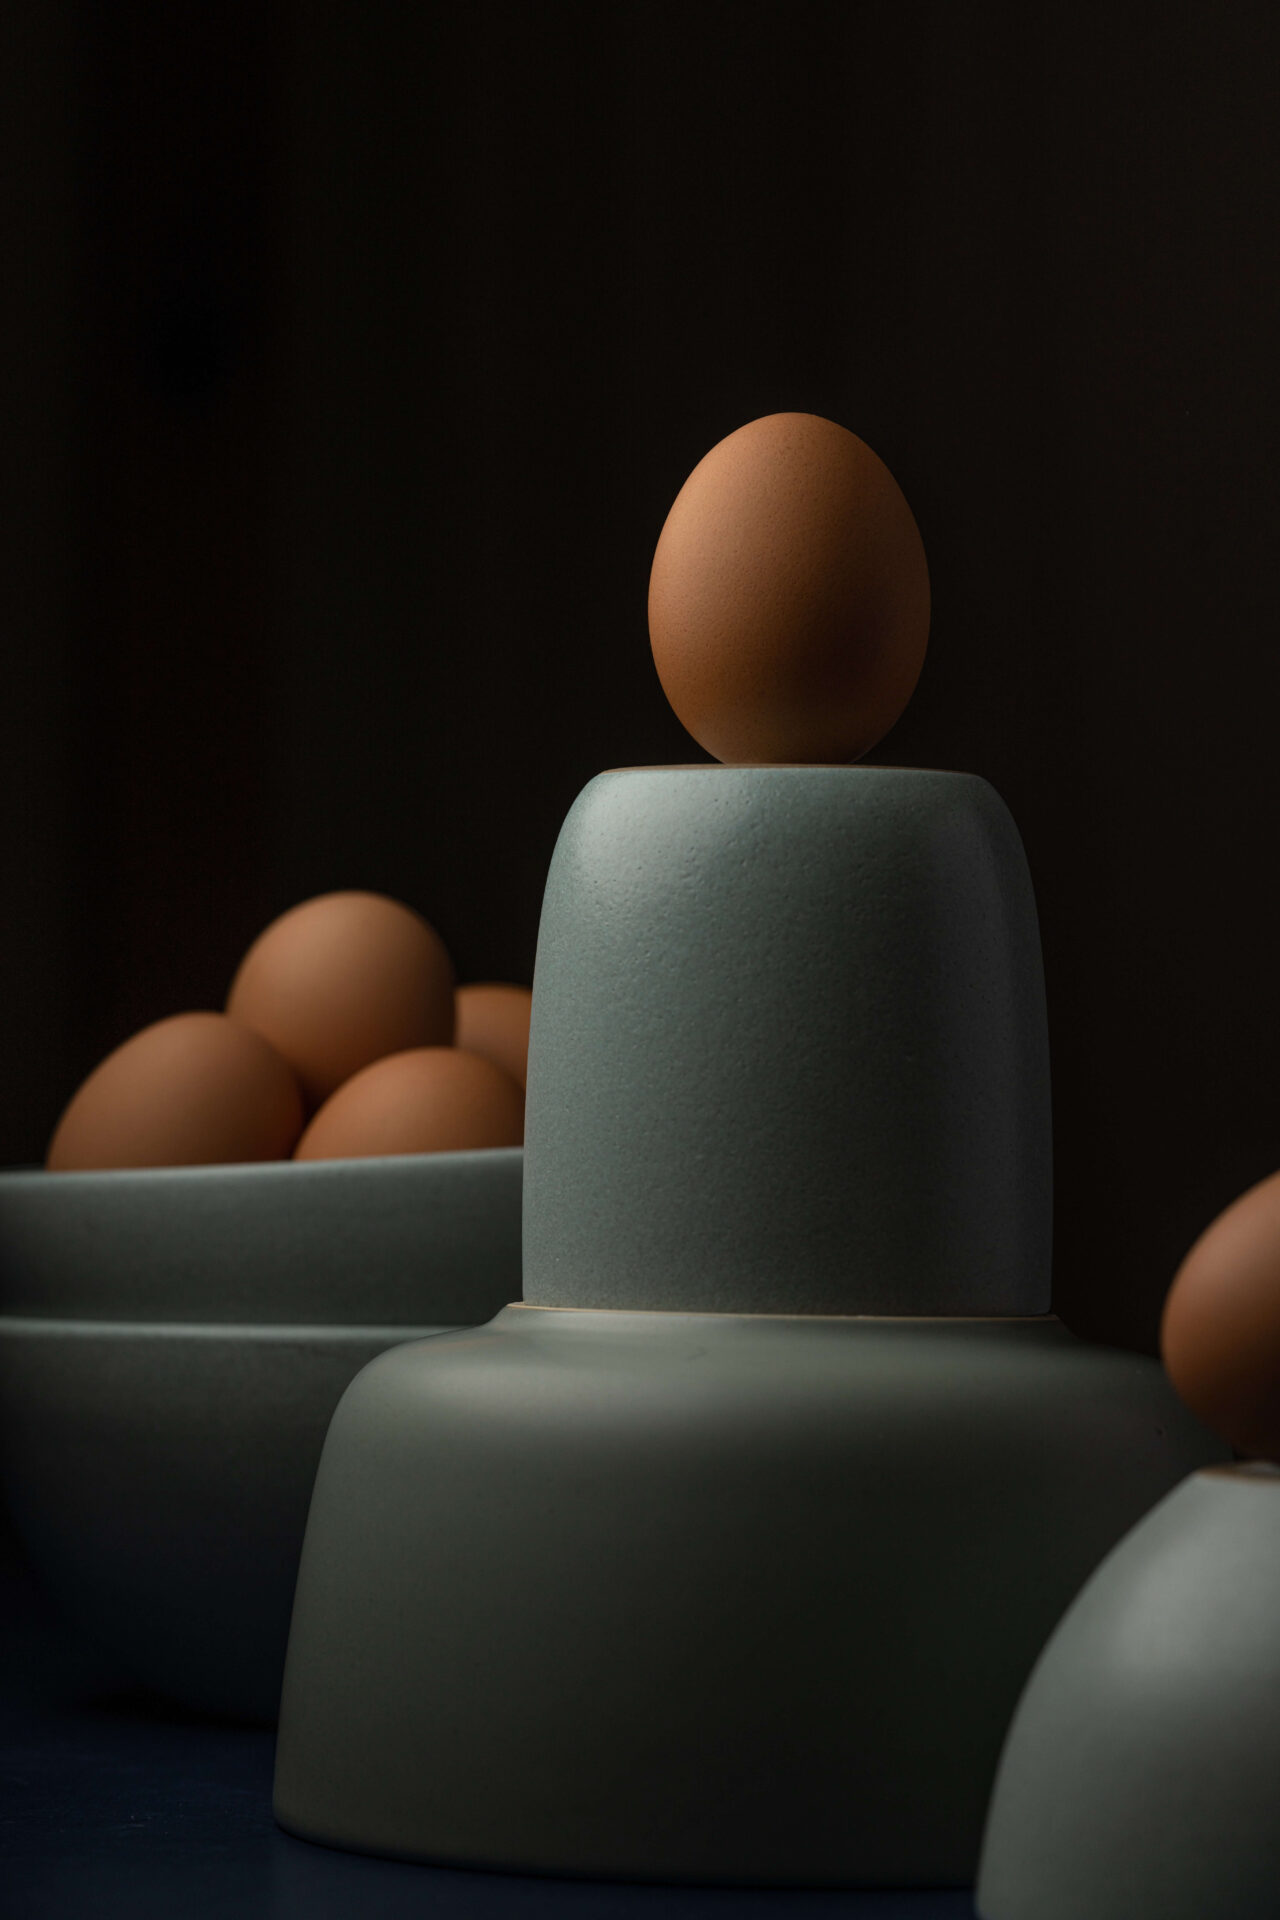 Black background with brown eggs on green ceramic dishes. Photo by skyler ewing on pexels.